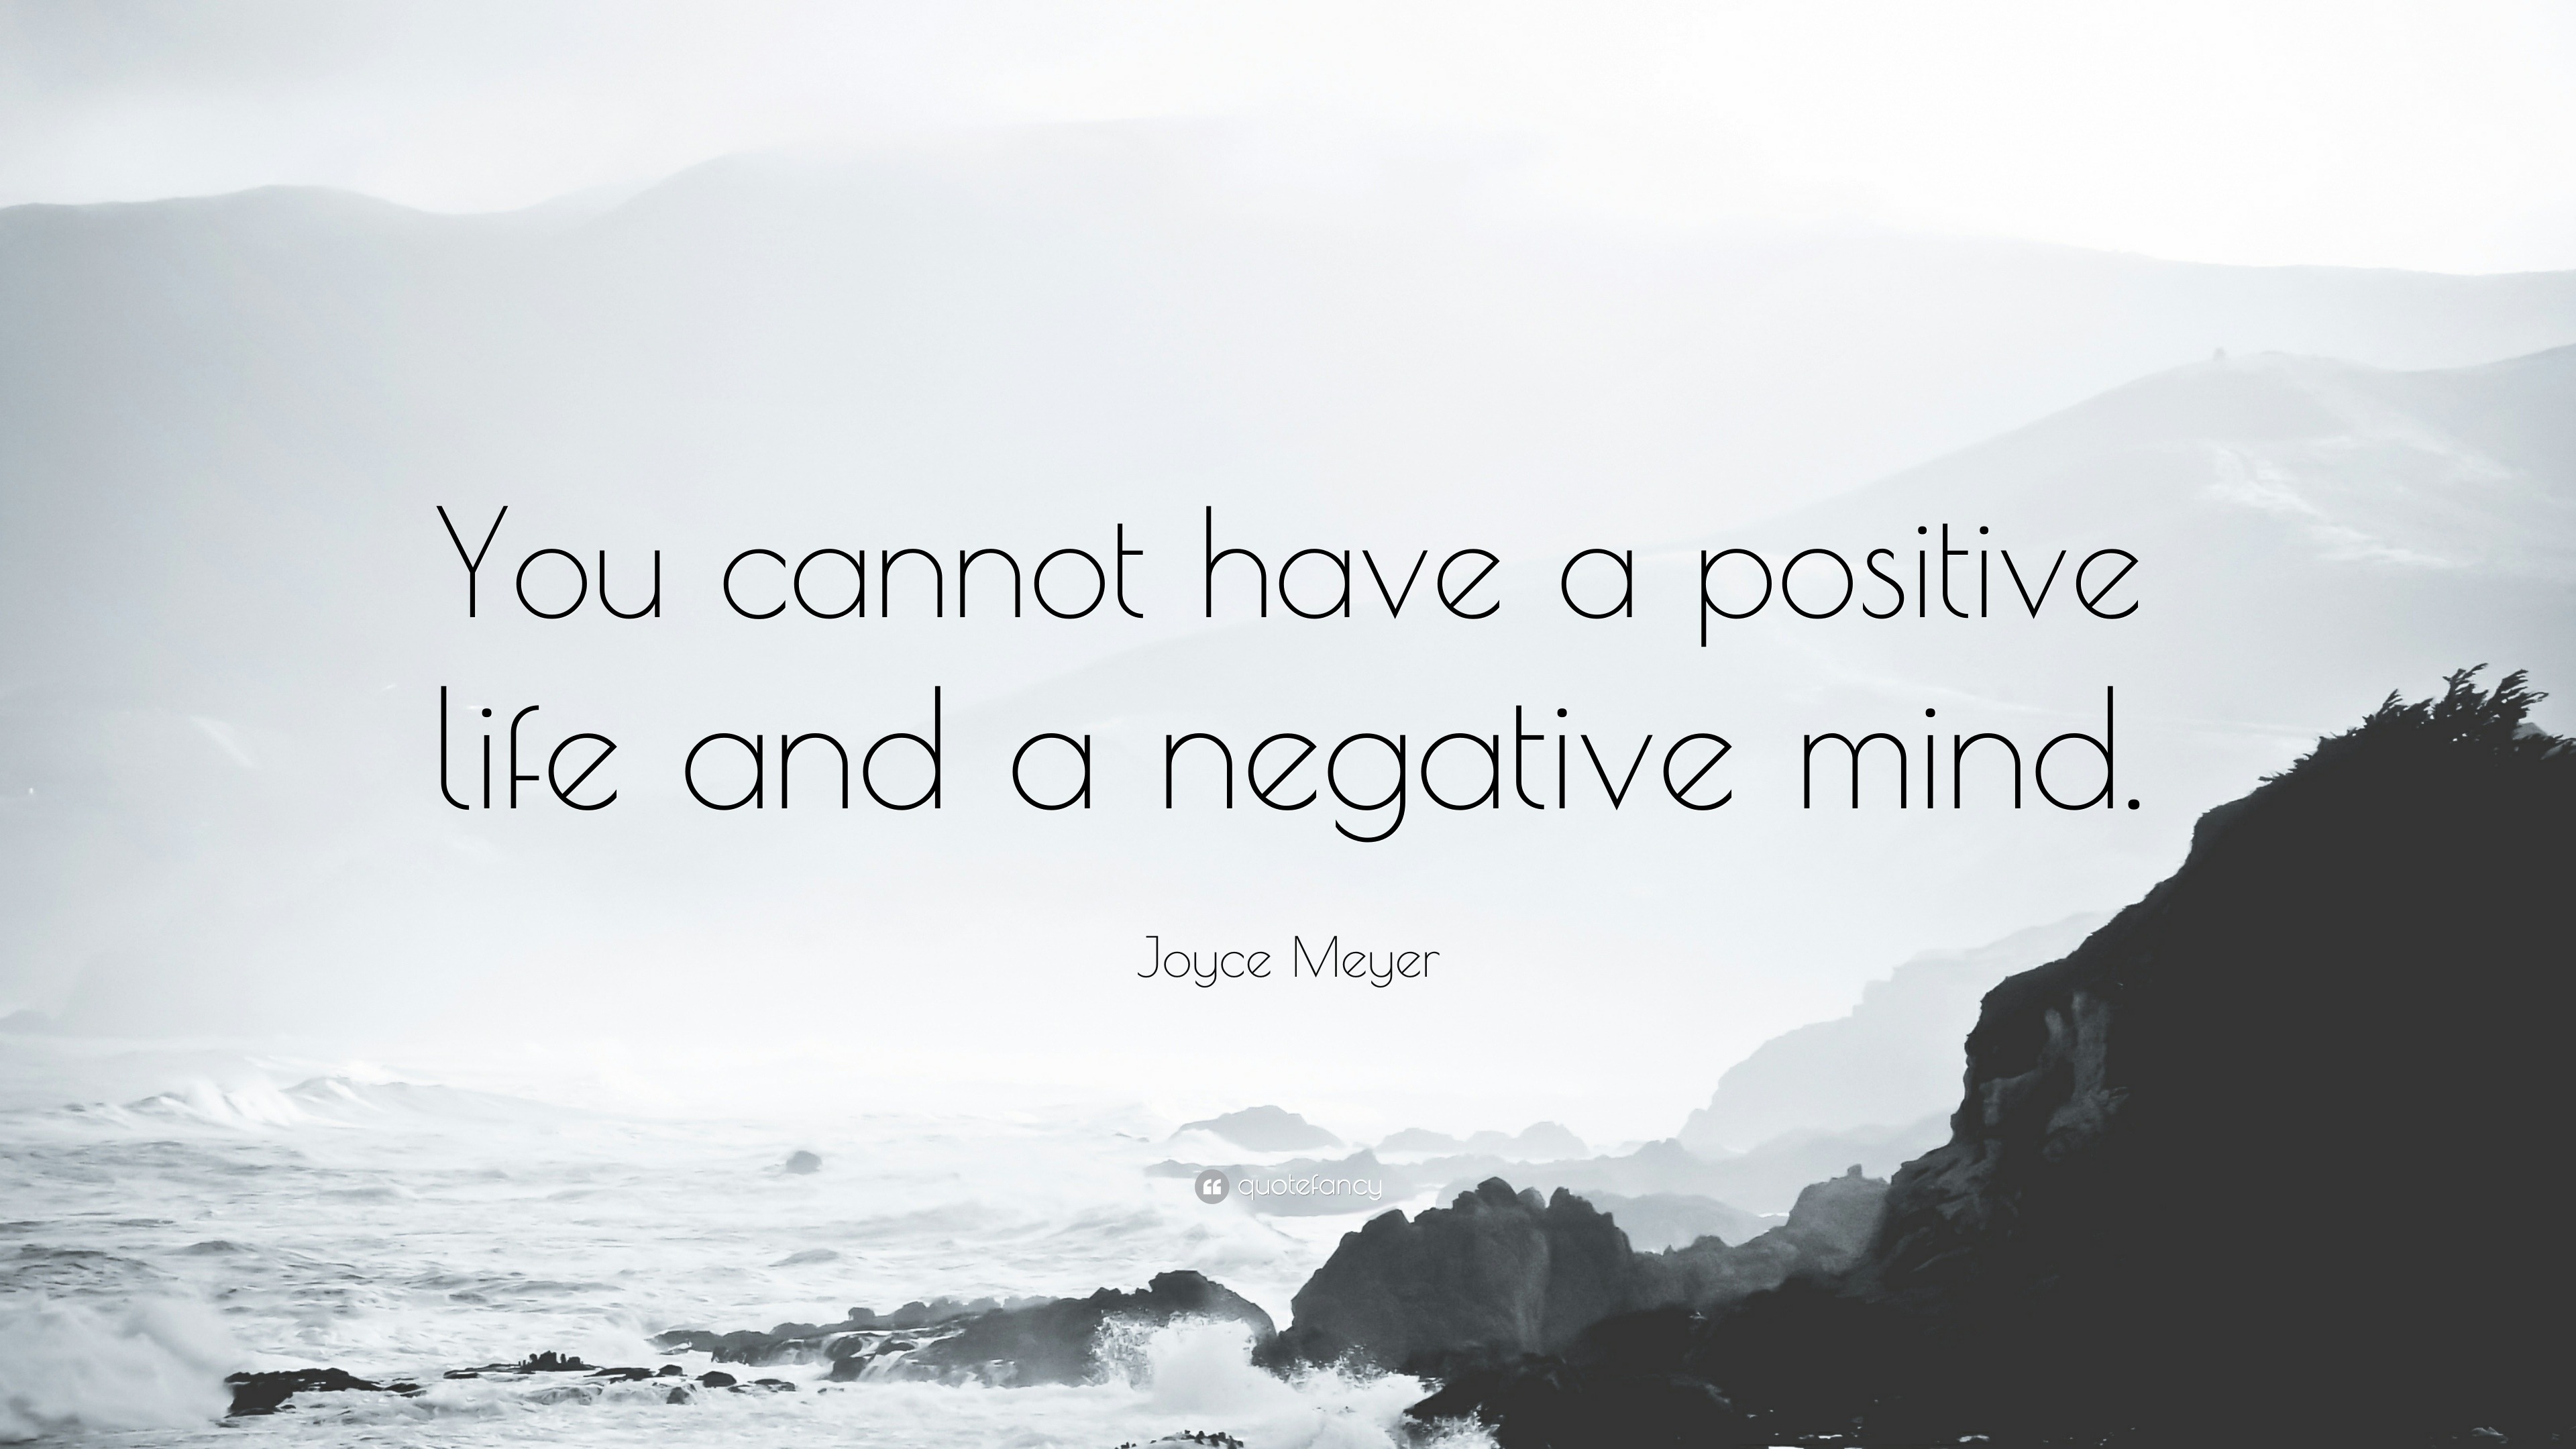 Positive Quotes “You cannot have a positive life and a negative mind ”